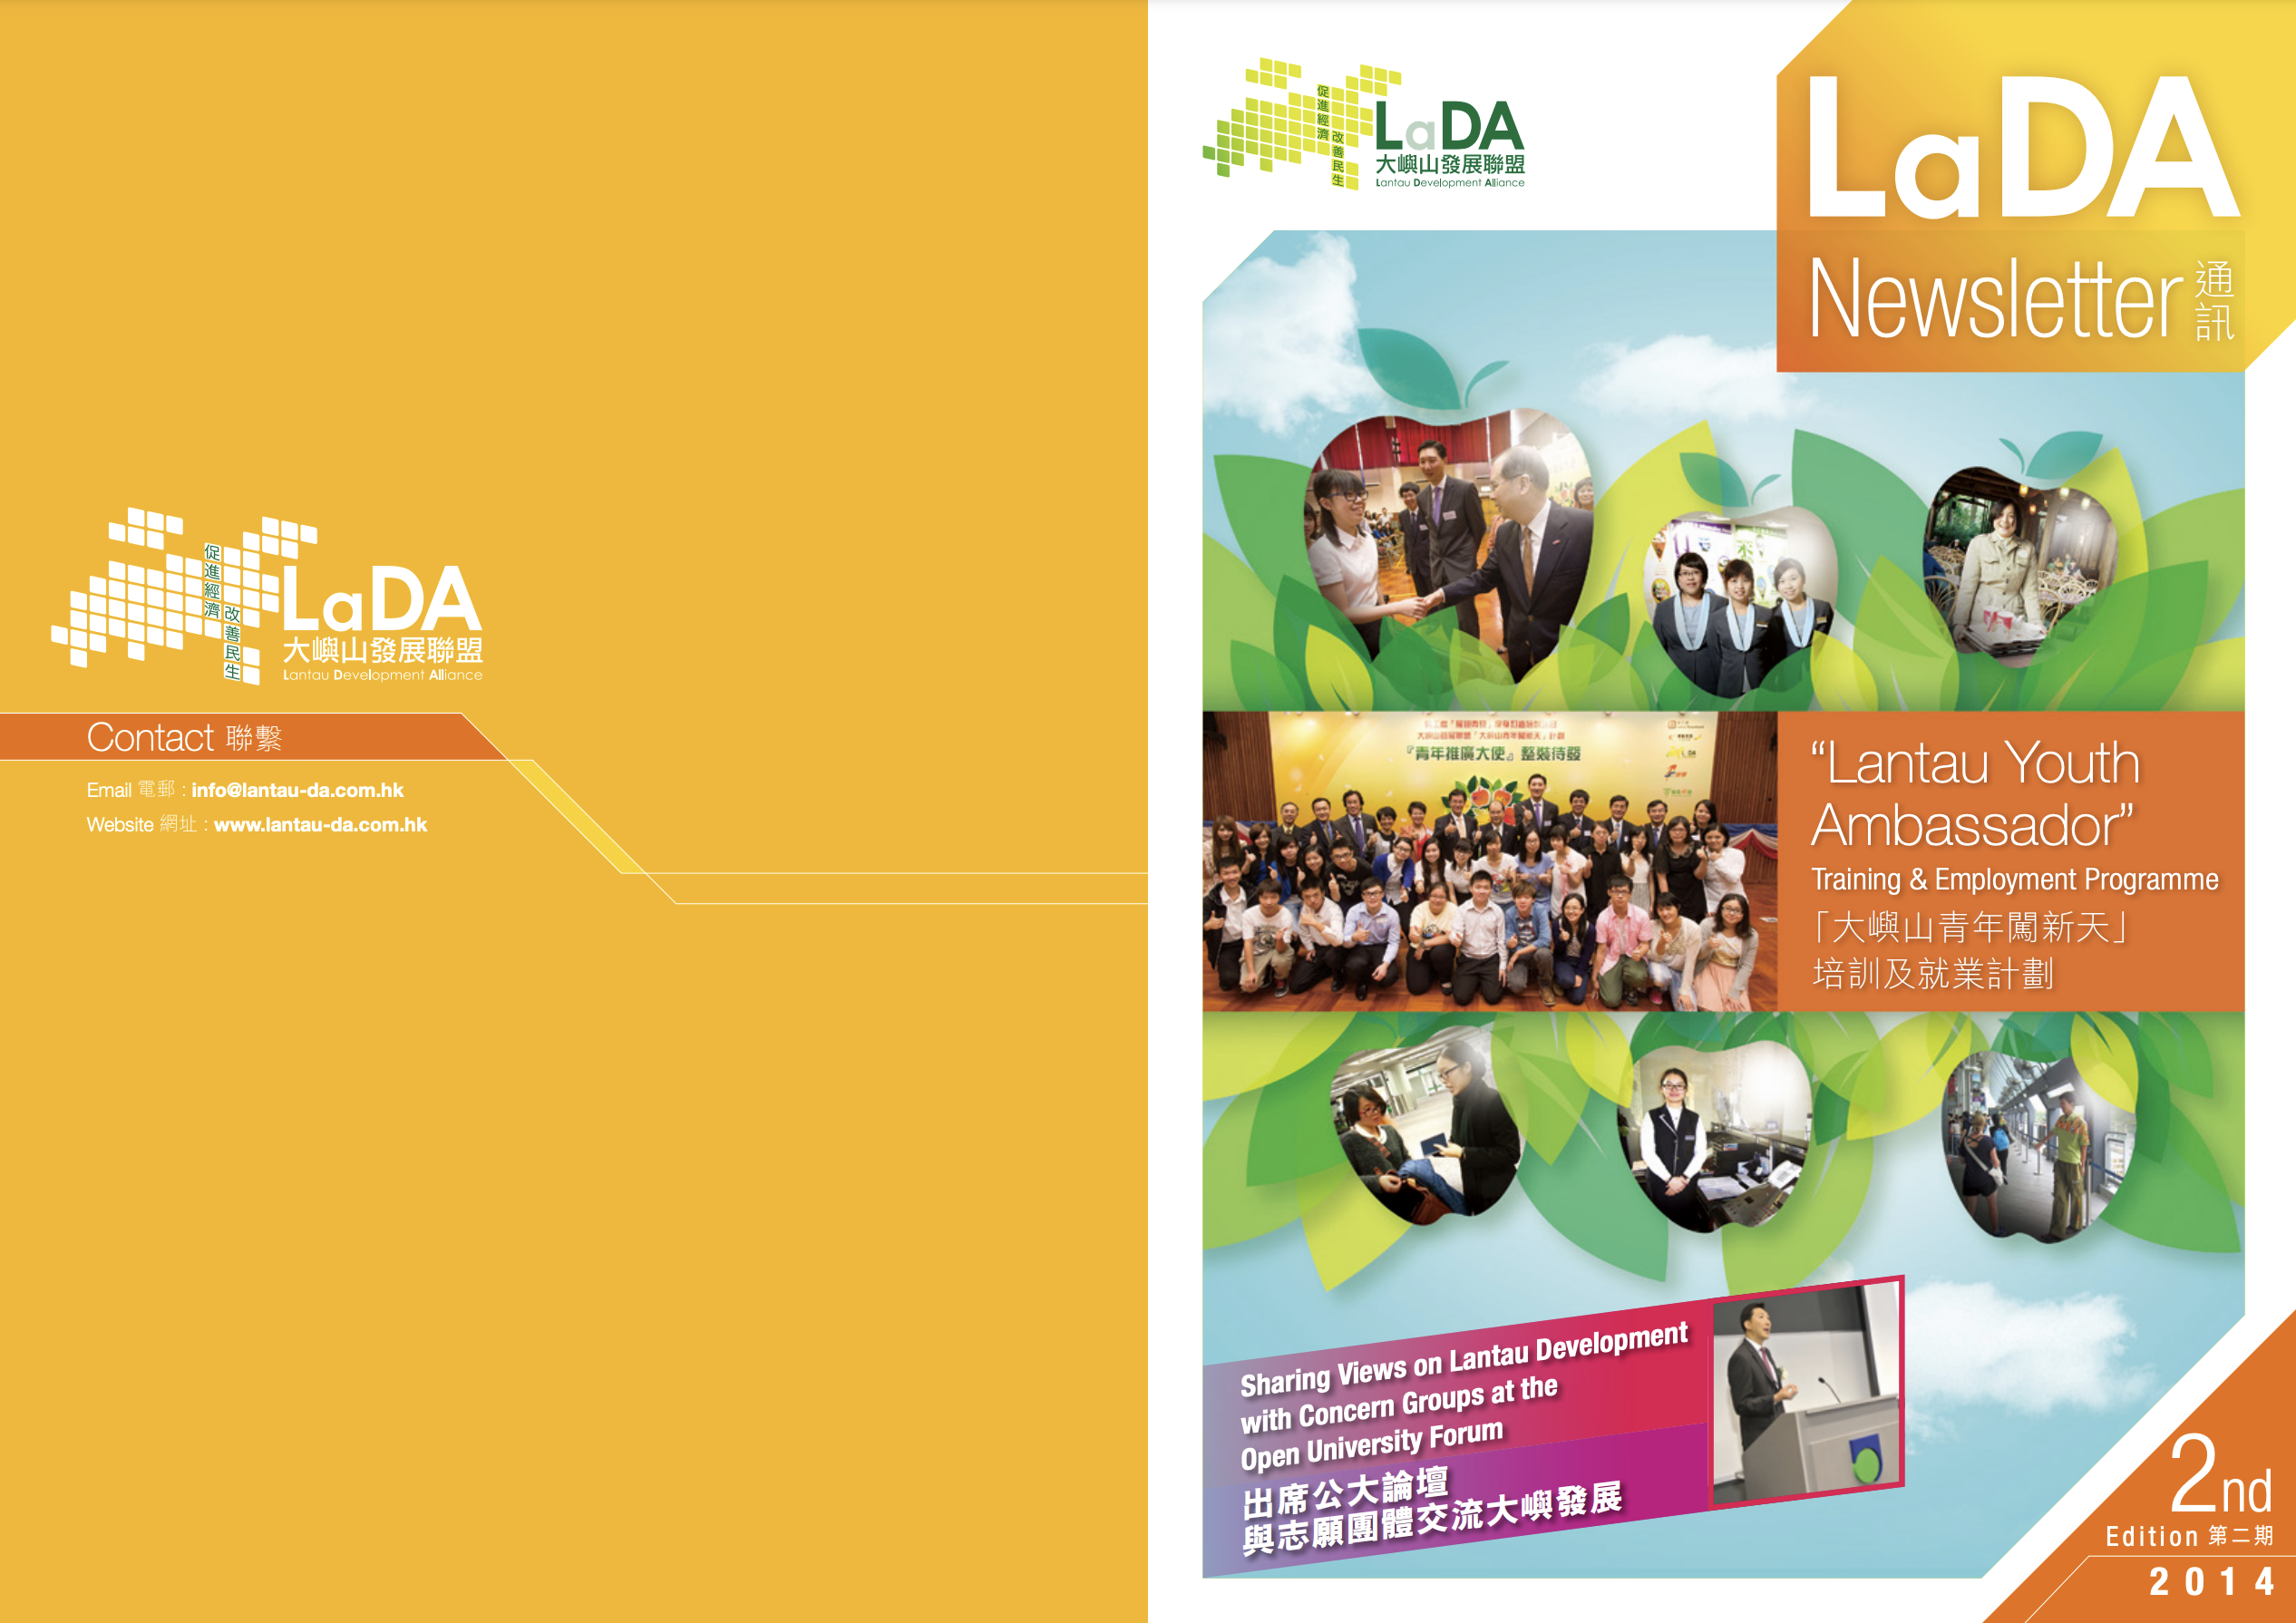 LaDA Newsletter 2nd Edition